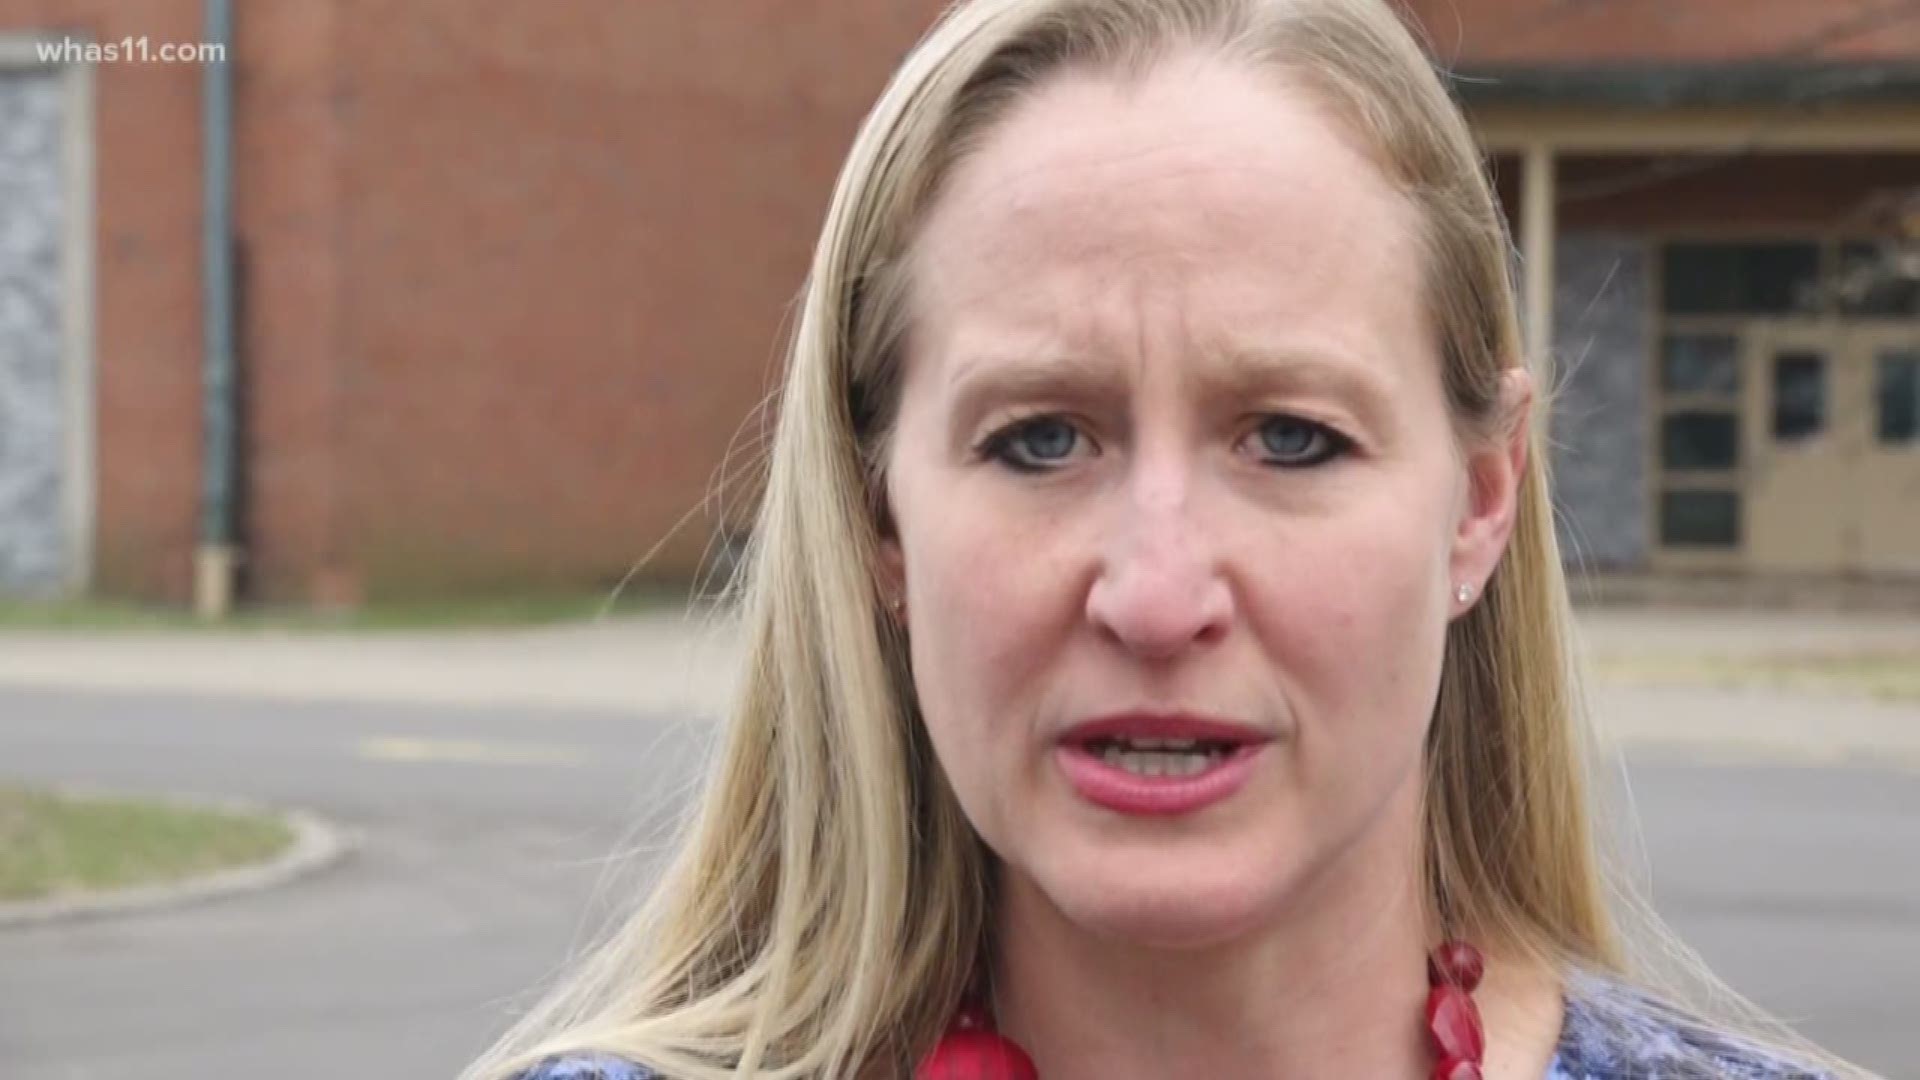 A JCPS teacher says she does not feel supported,